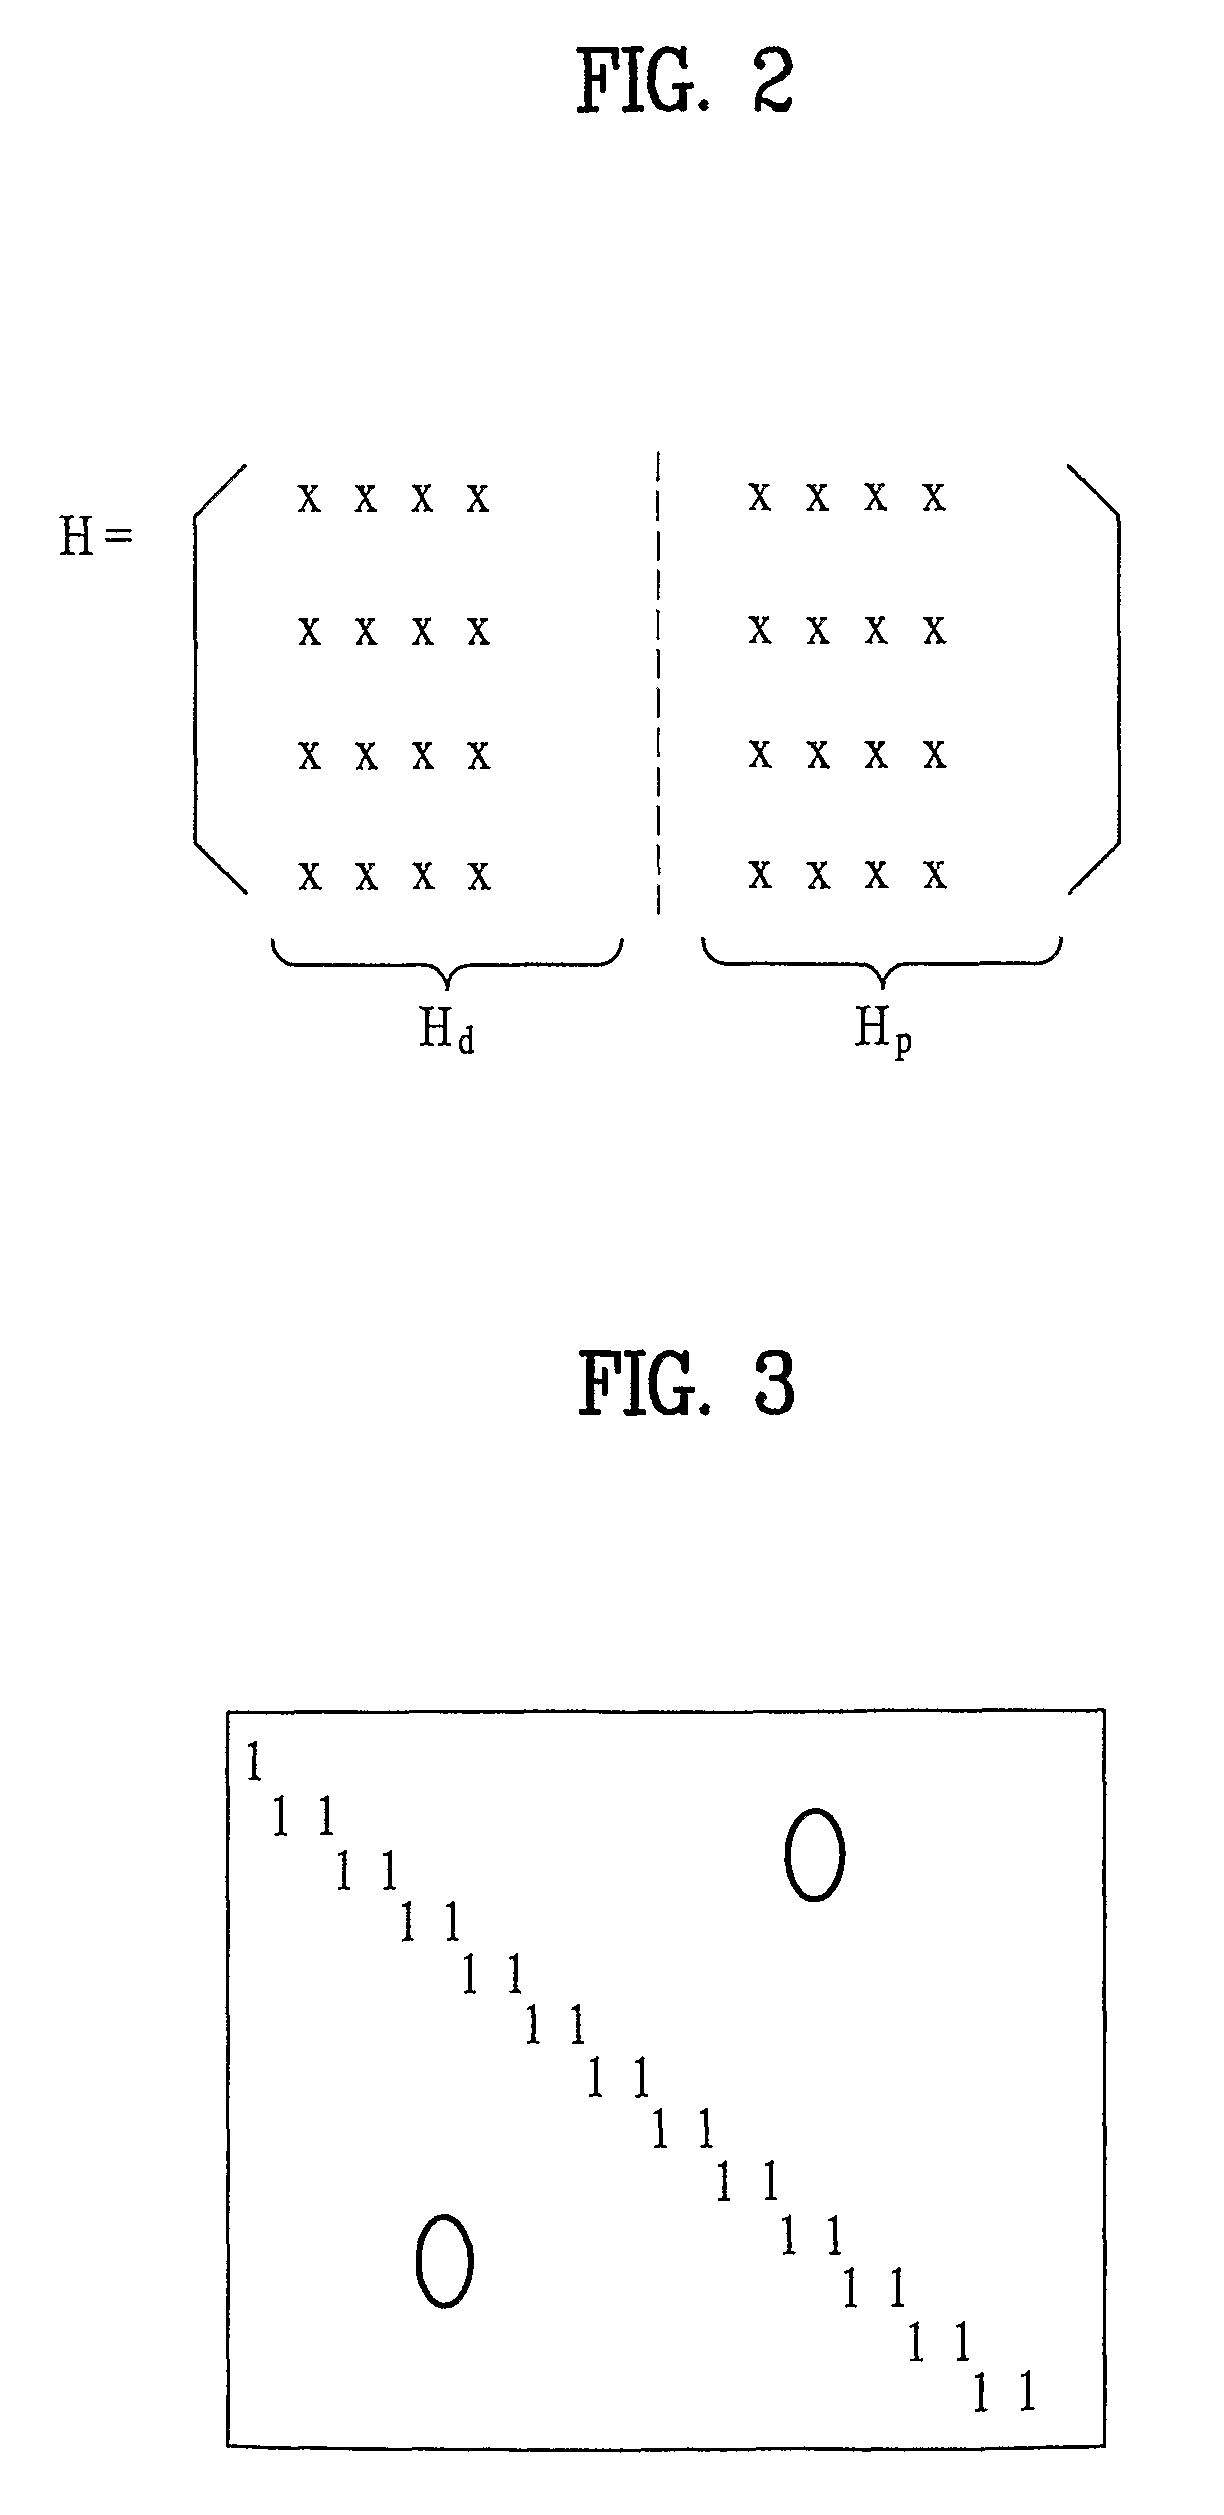 Method of encoding and decoding using low density parity check code